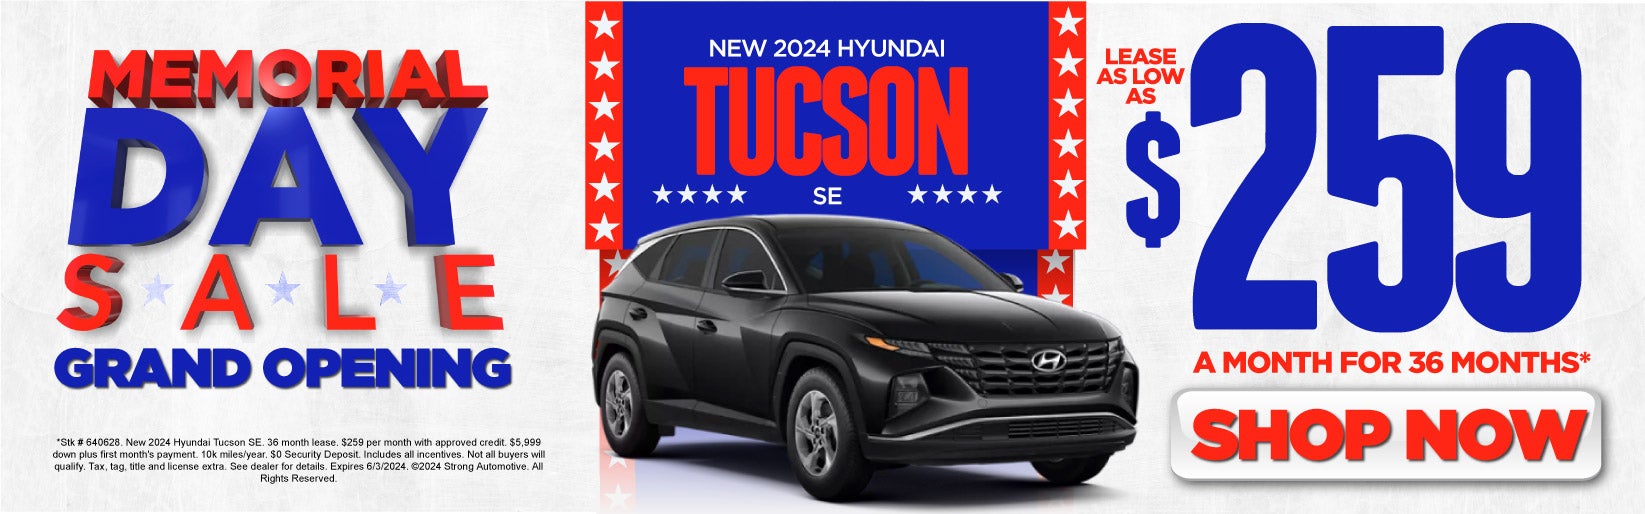 New 2024 Hyundai Tucson SE - Lease for as low as $259/mo*